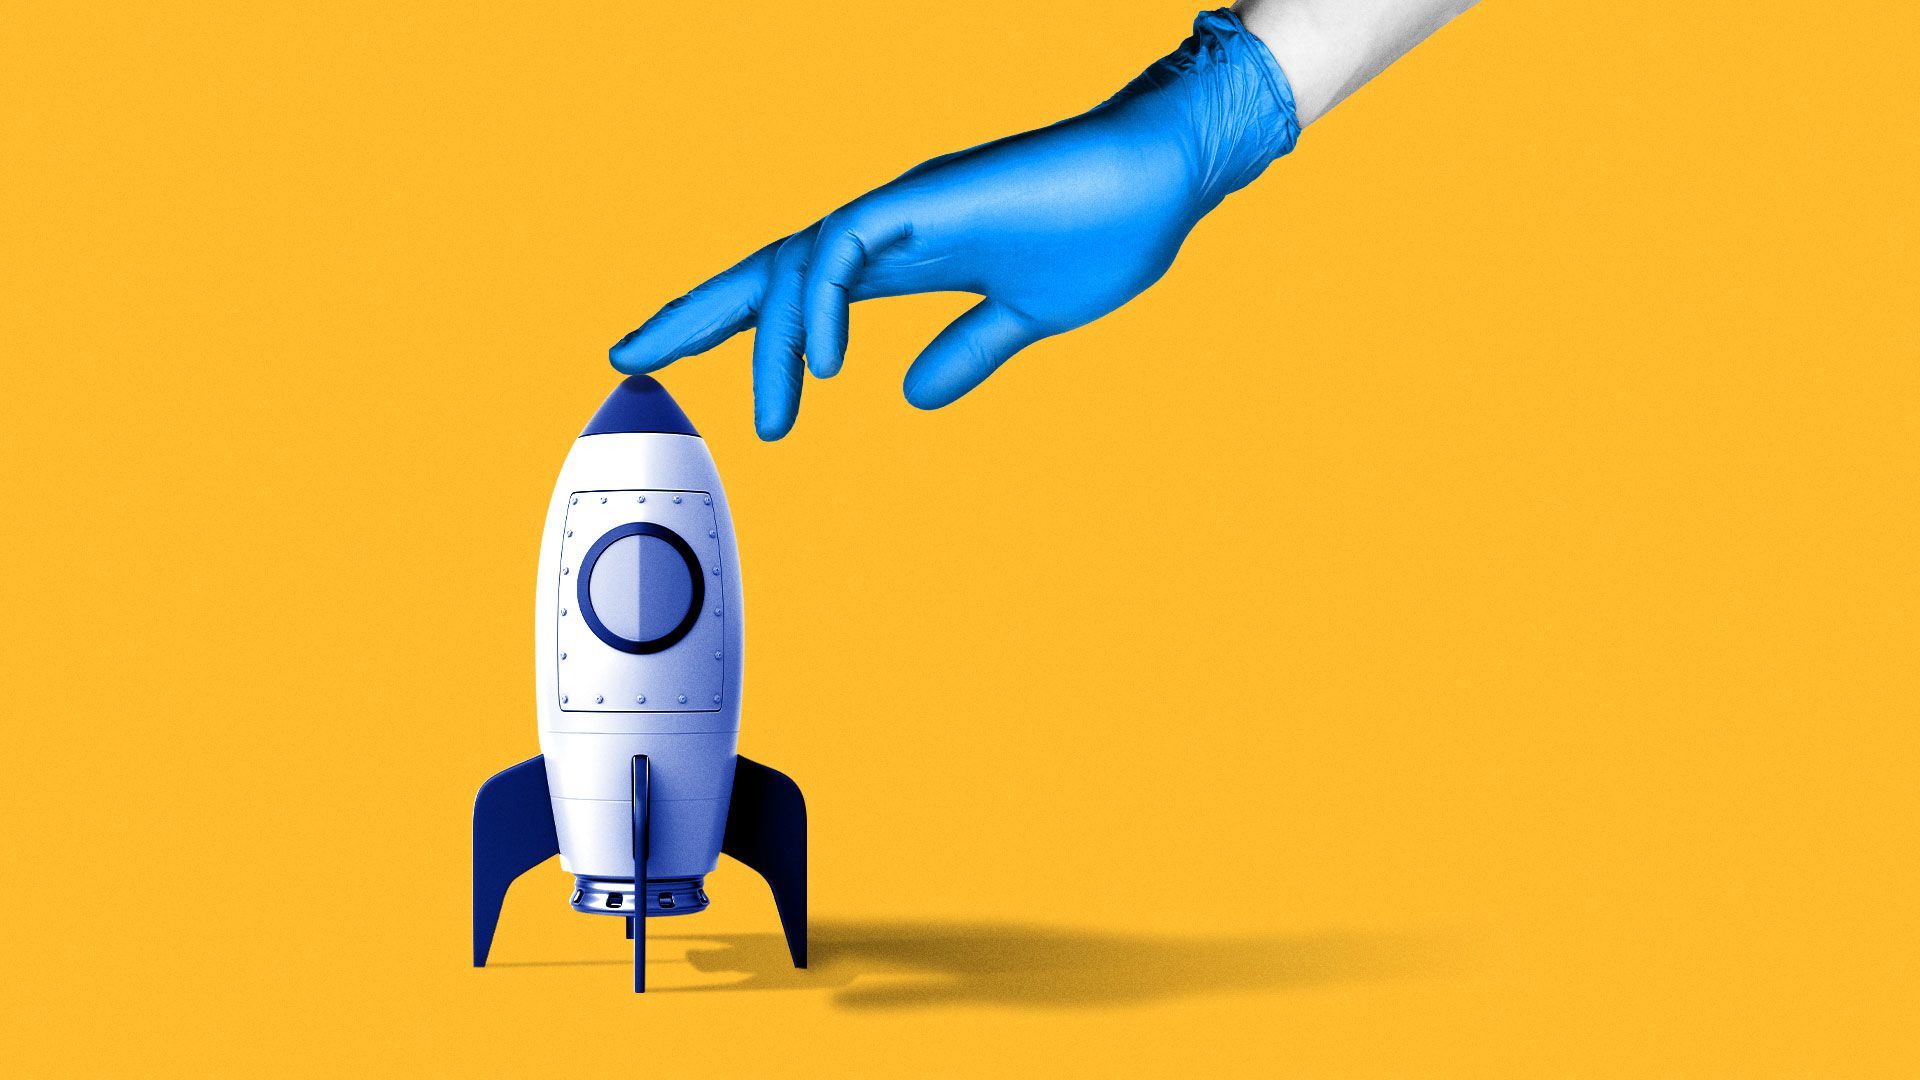 Illustration of gloved hand holding down a space rocket